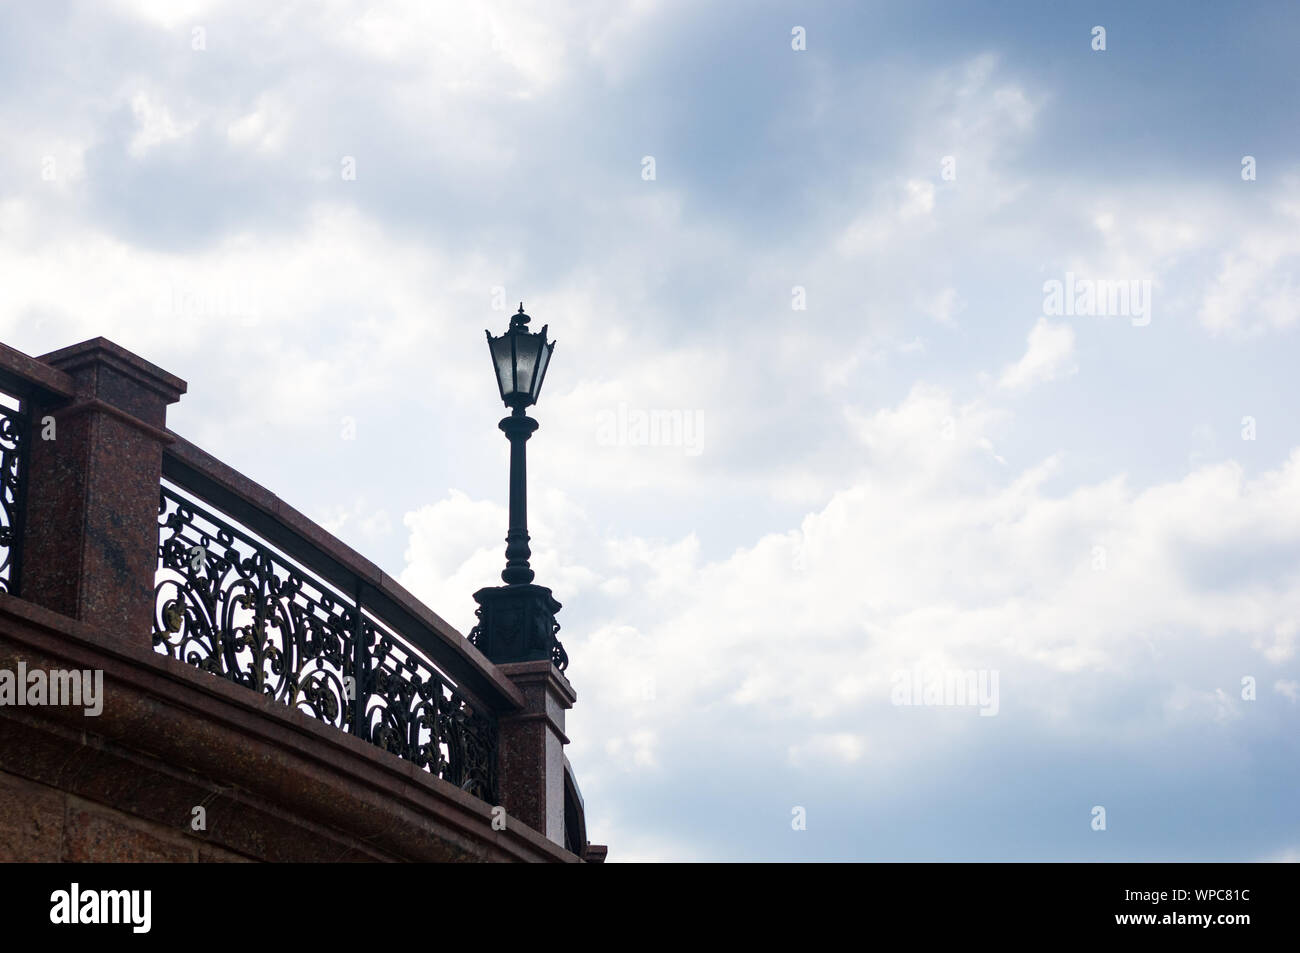 Classic style city lamppost at sunset, close up Stock Photo